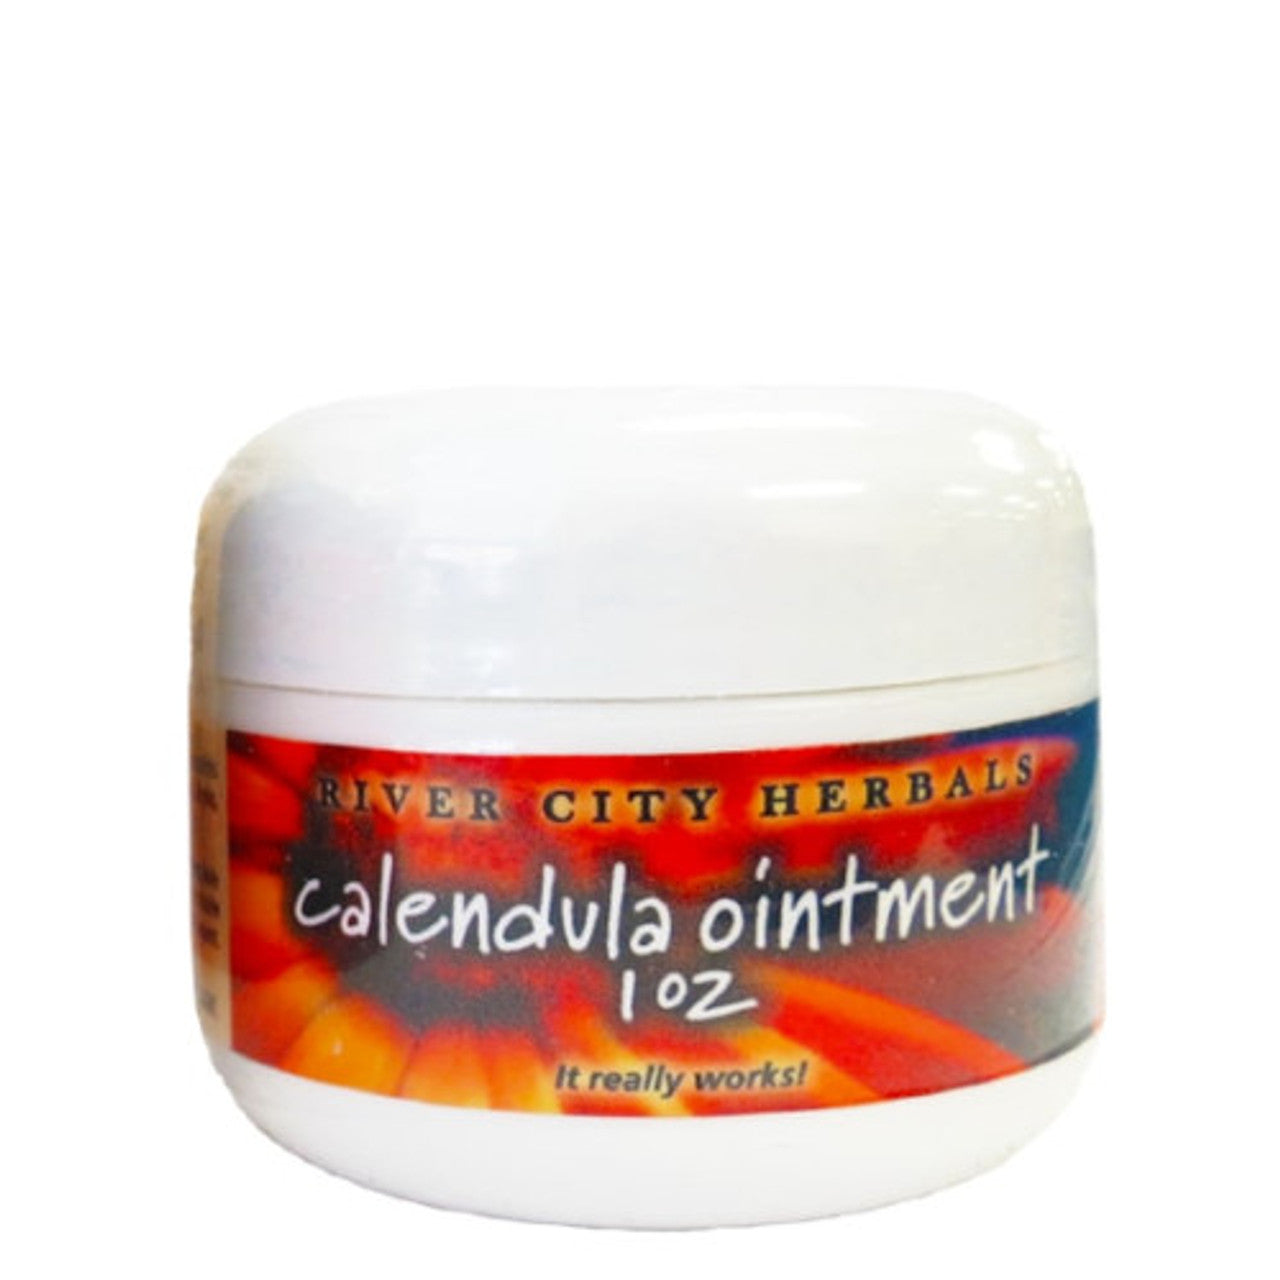 Calendula ointment by Riverr City Herbals, 1 oz (28 g)